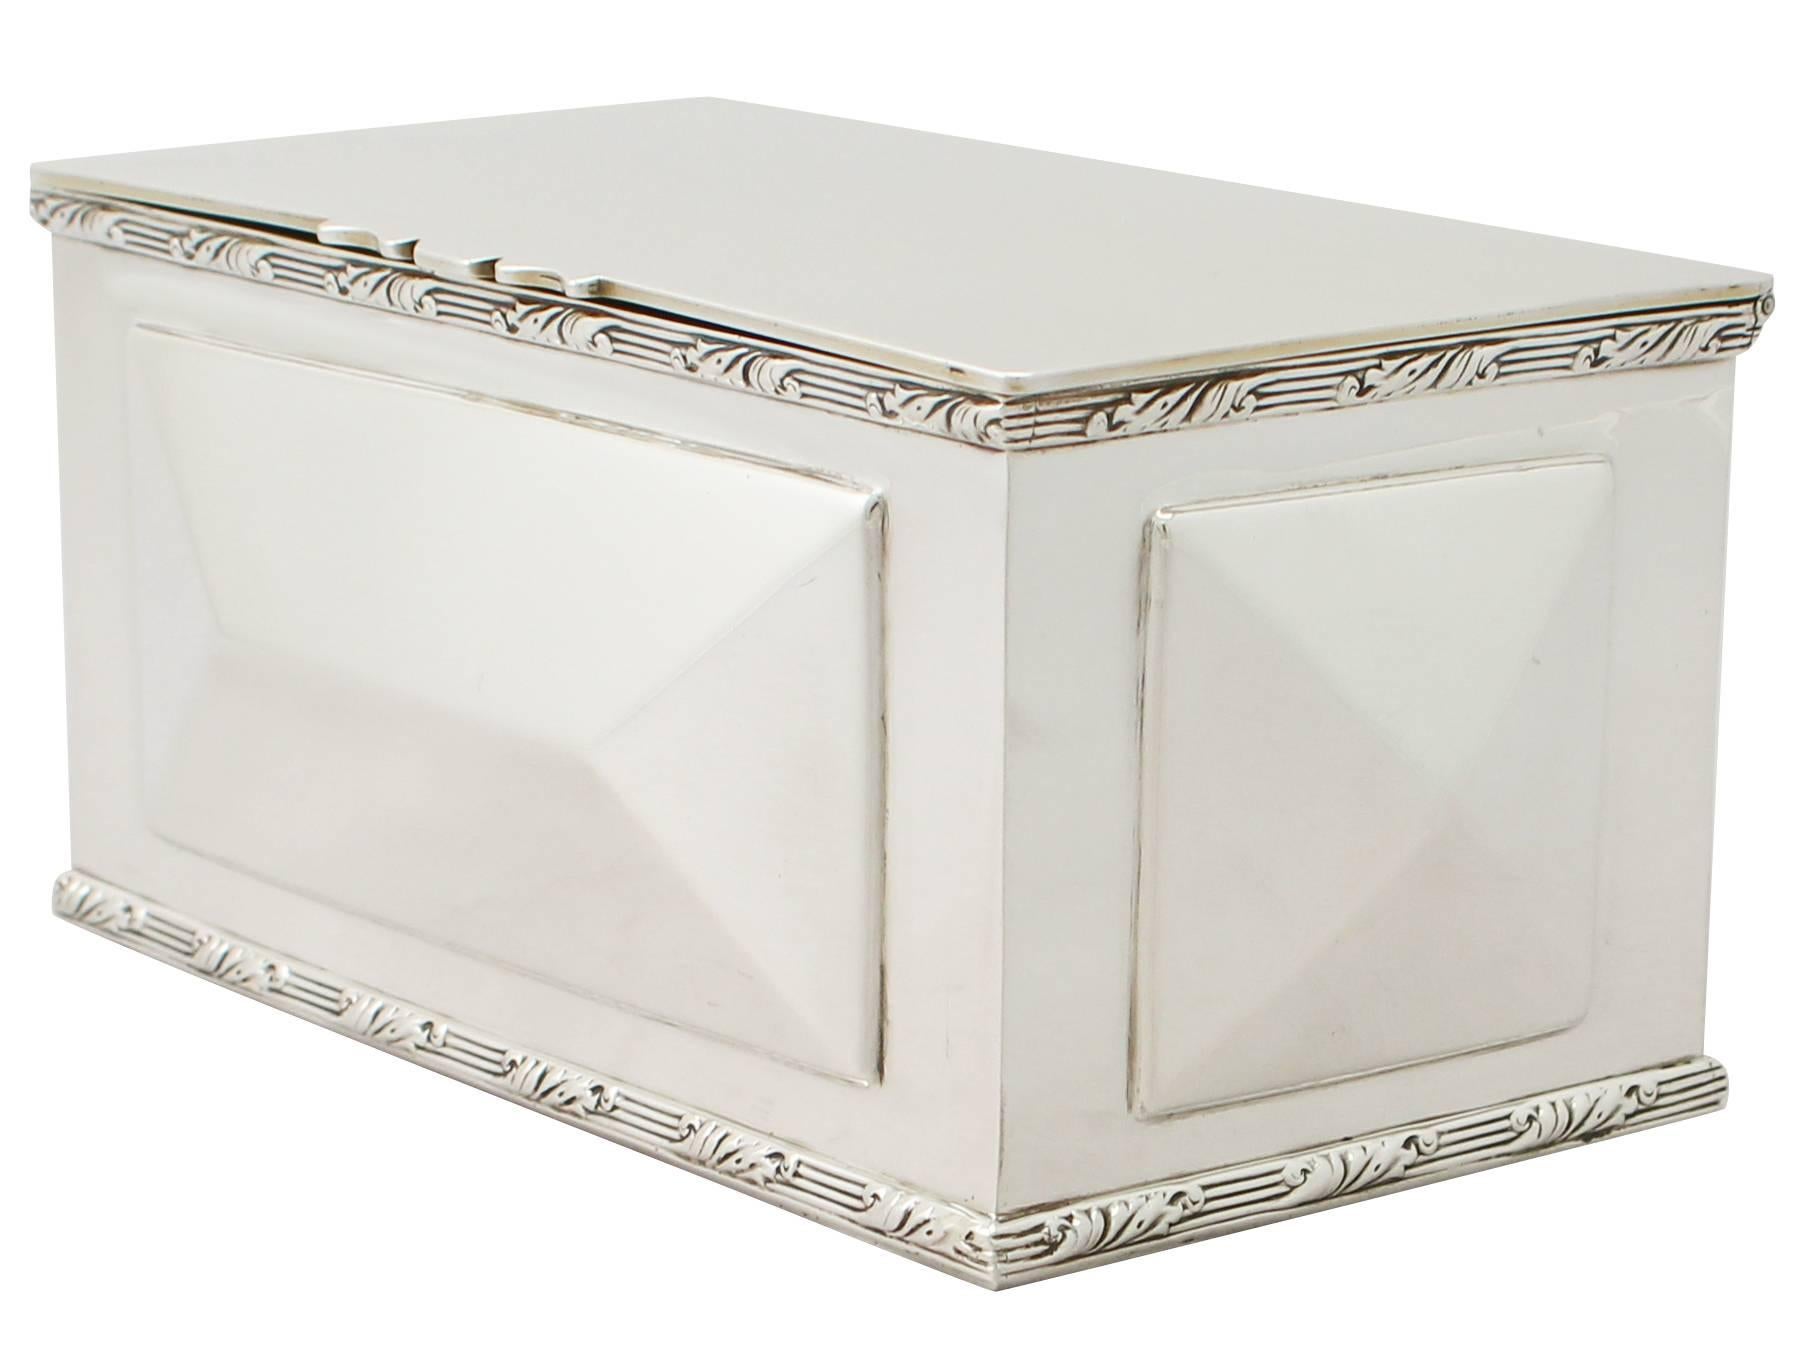 An exceptional, fine and impressive, large antique Edwardian English sterling silver box; an addition to the ornamental silverware collection

This exceptional antique Edwardian sterling silver box has a rectangular shaped form.

The surface of